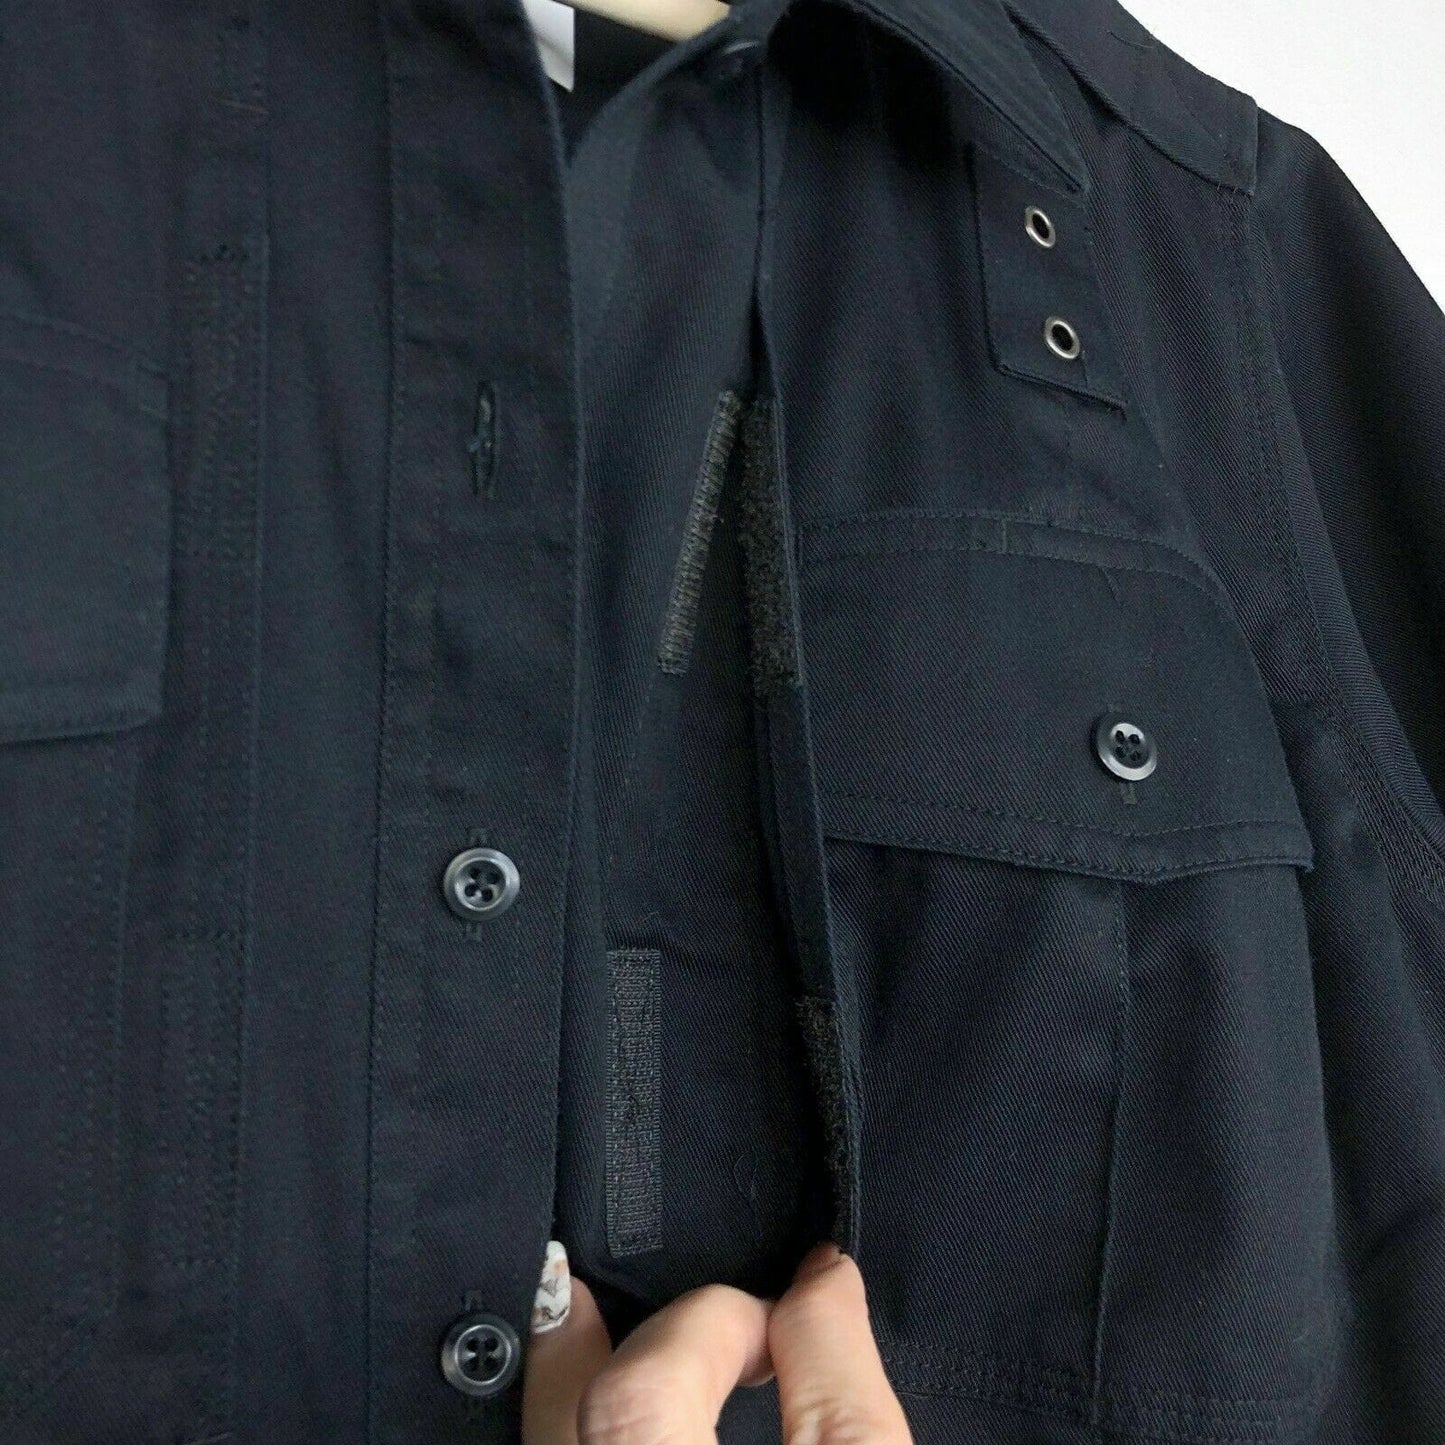 511 Tactical Series Womens Size M Black Concealed Pockets Shirt